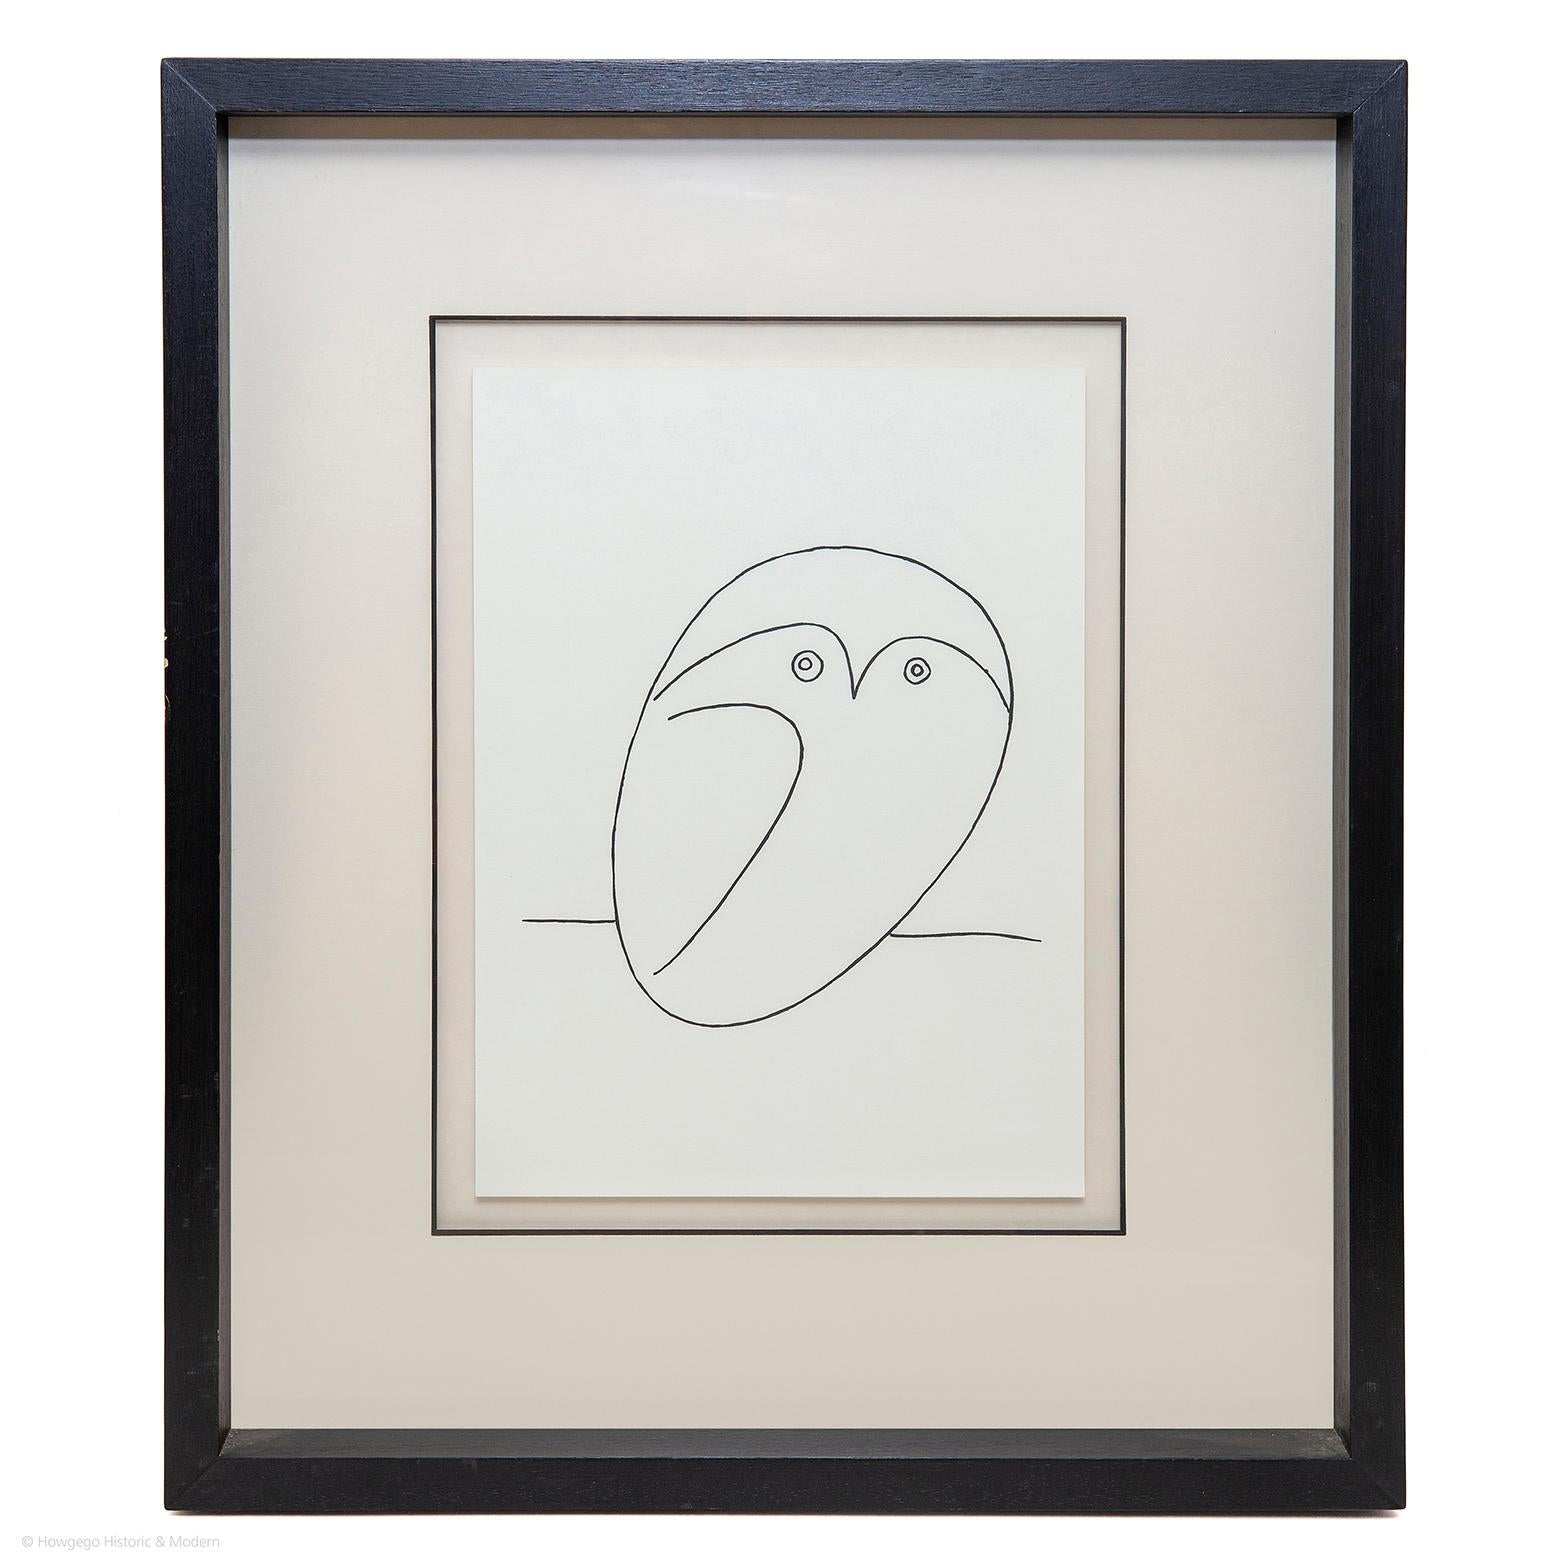 This set of 6 Picasso line drawings is part of Picasso's range of 